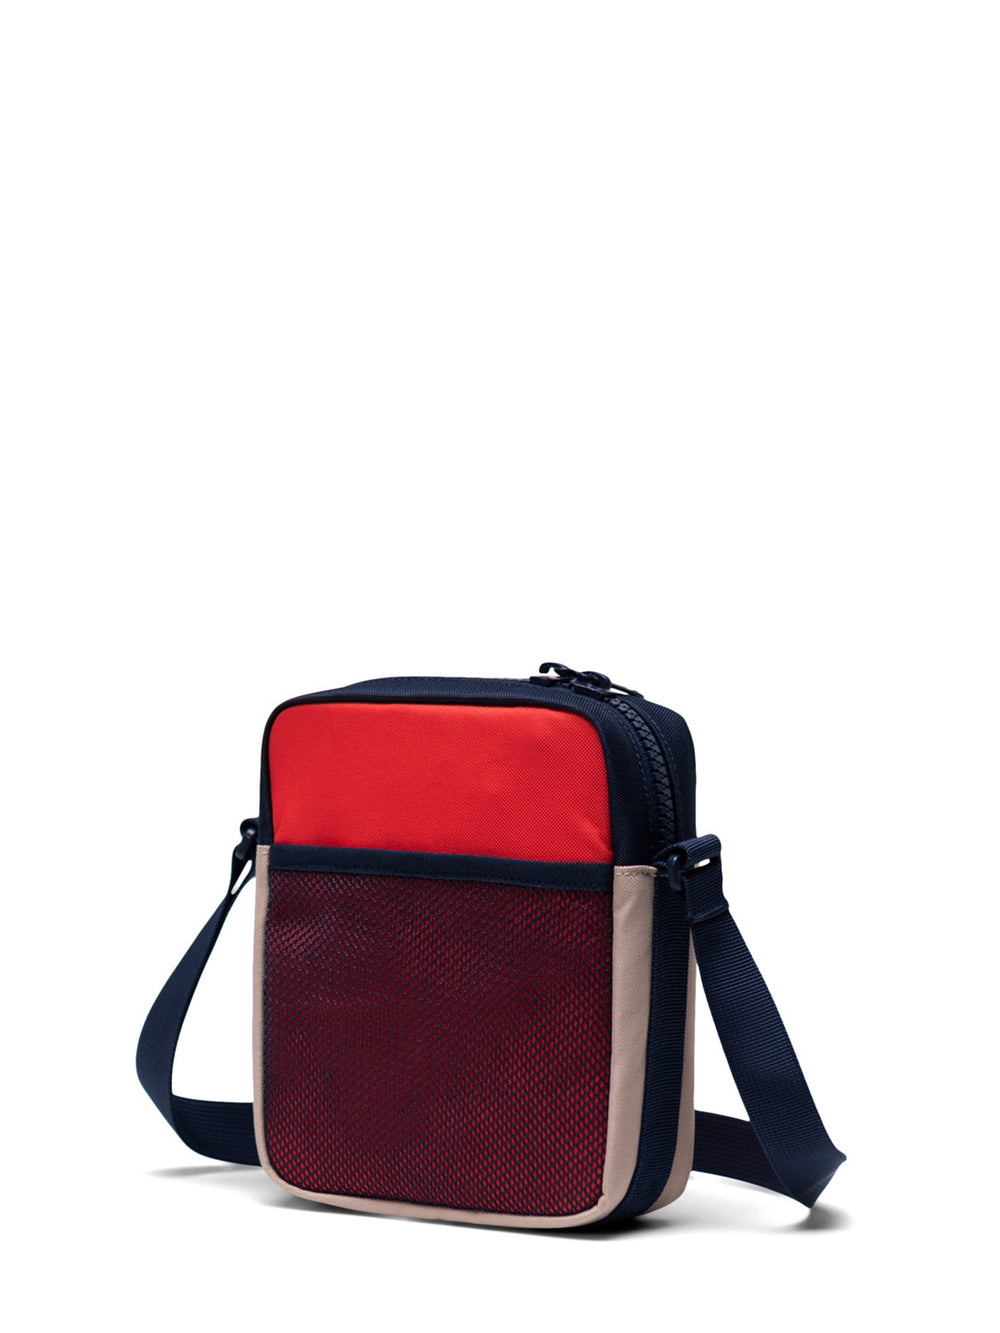 HERSCHEL SUPPLY CO. HERITAGE XBODY - RED - CLEARANCE